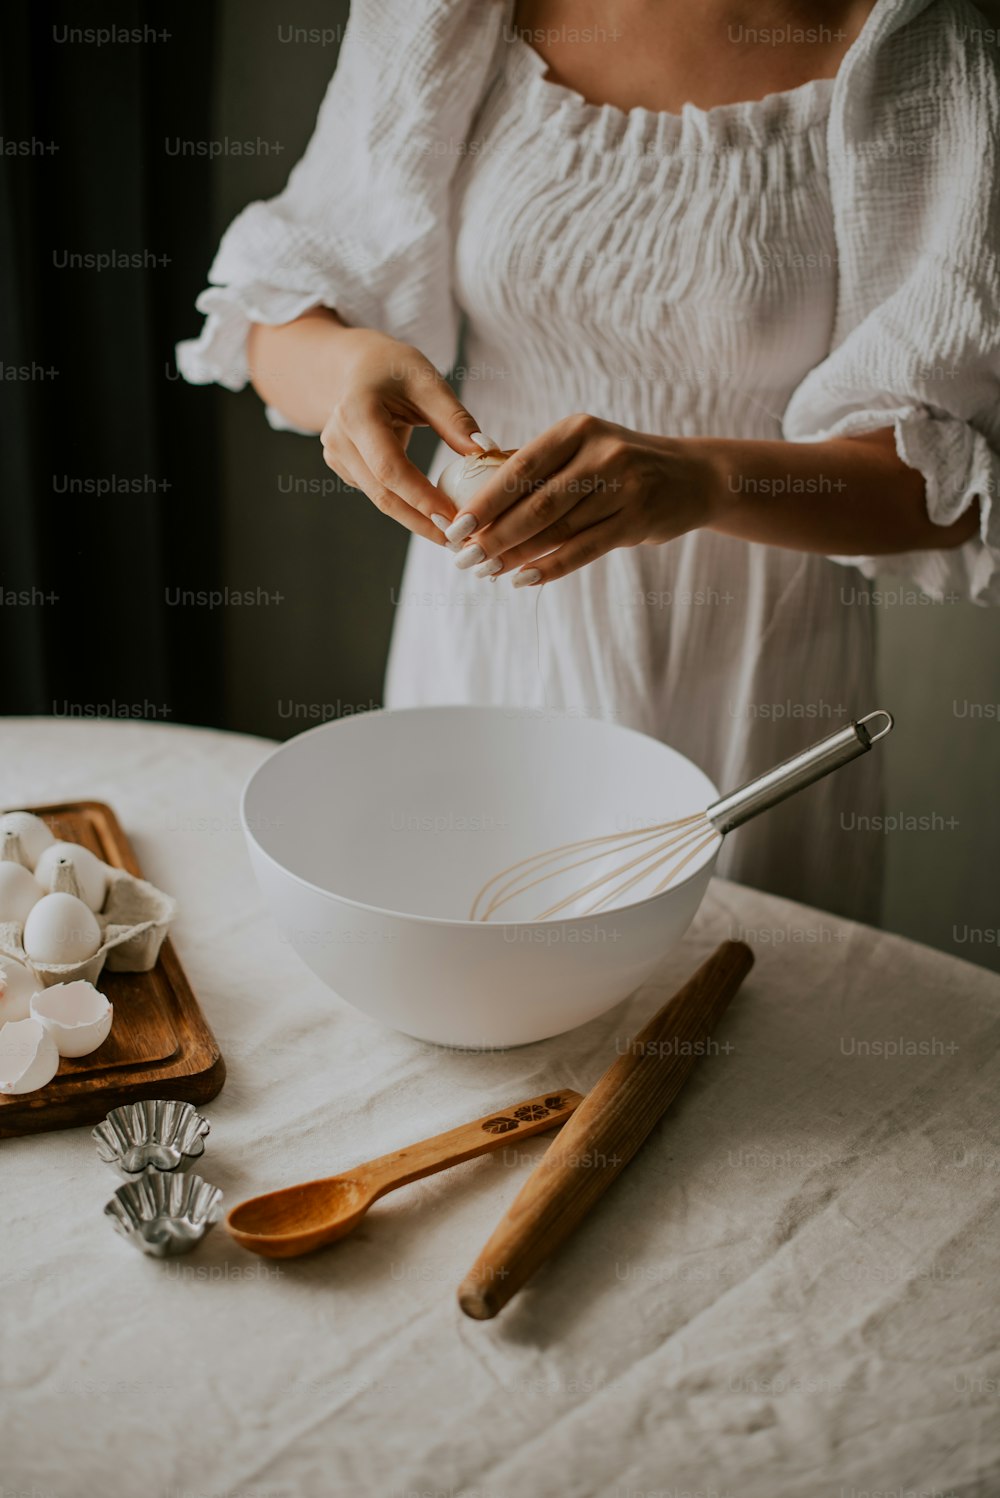 a woman in a white dress is mixing something in a bowl